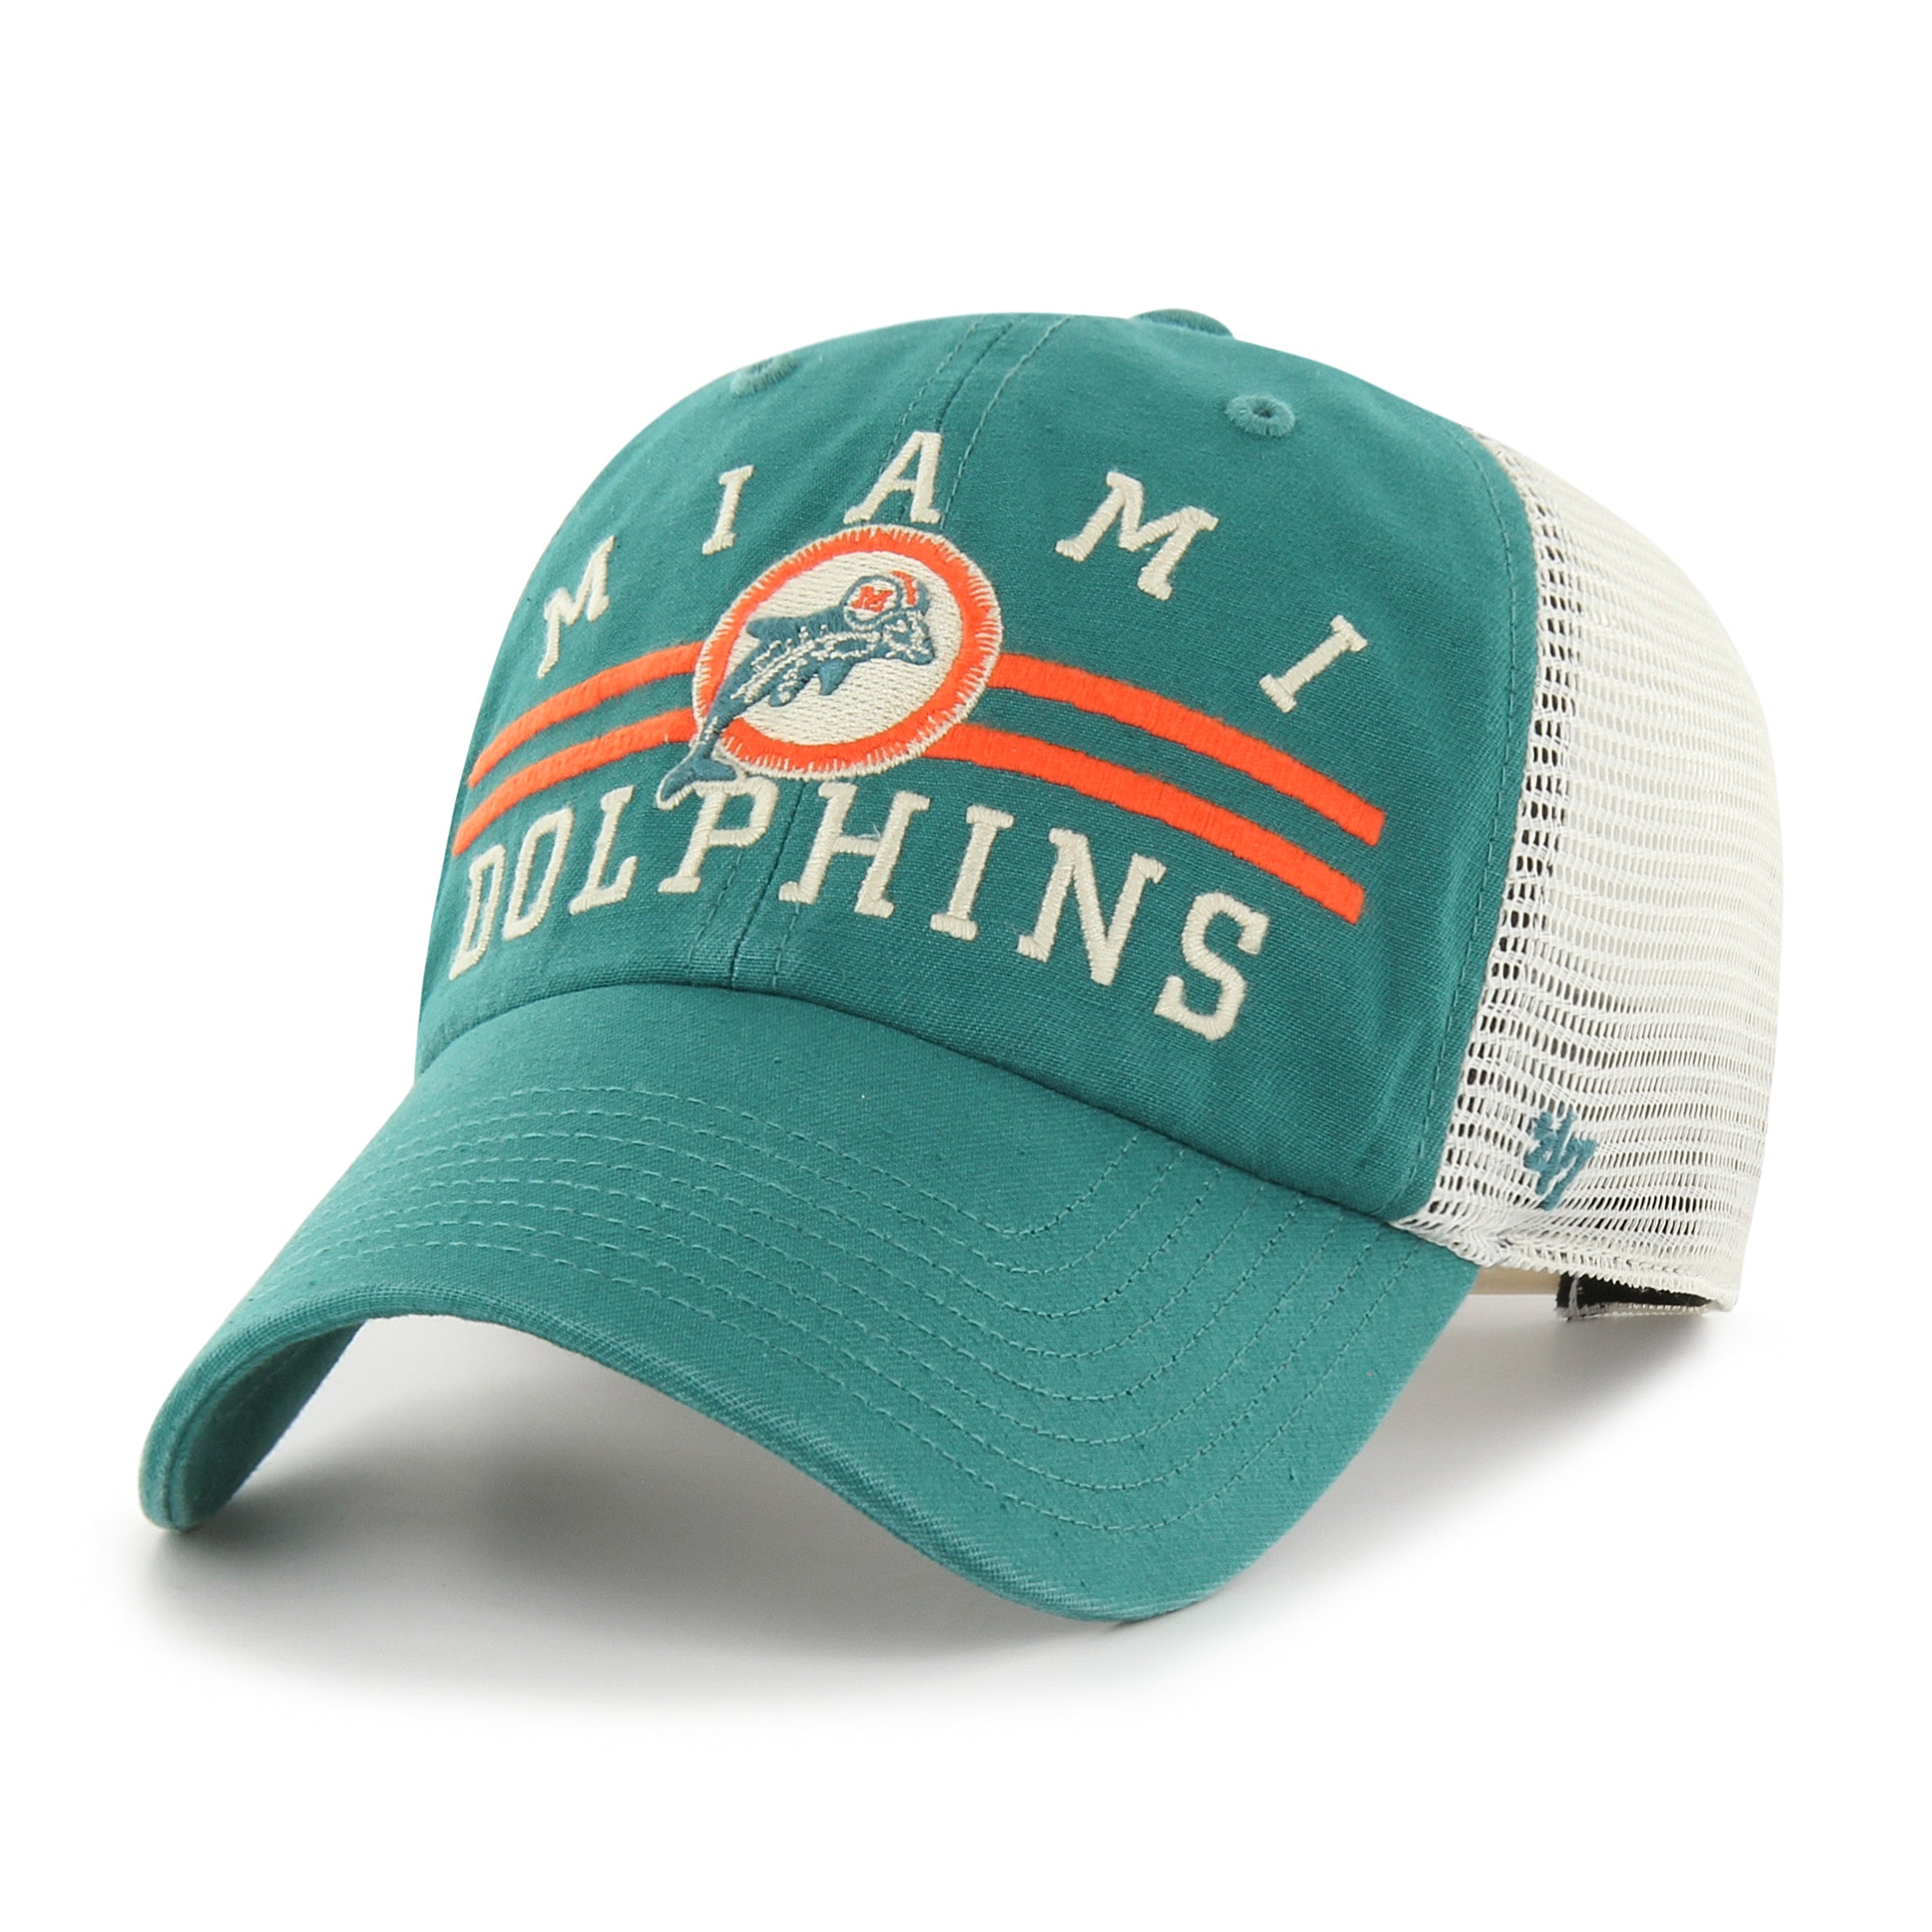 Miami Dolphins 47 Brand Legacy Tailgate Teal Clean Up Adjustable Hat